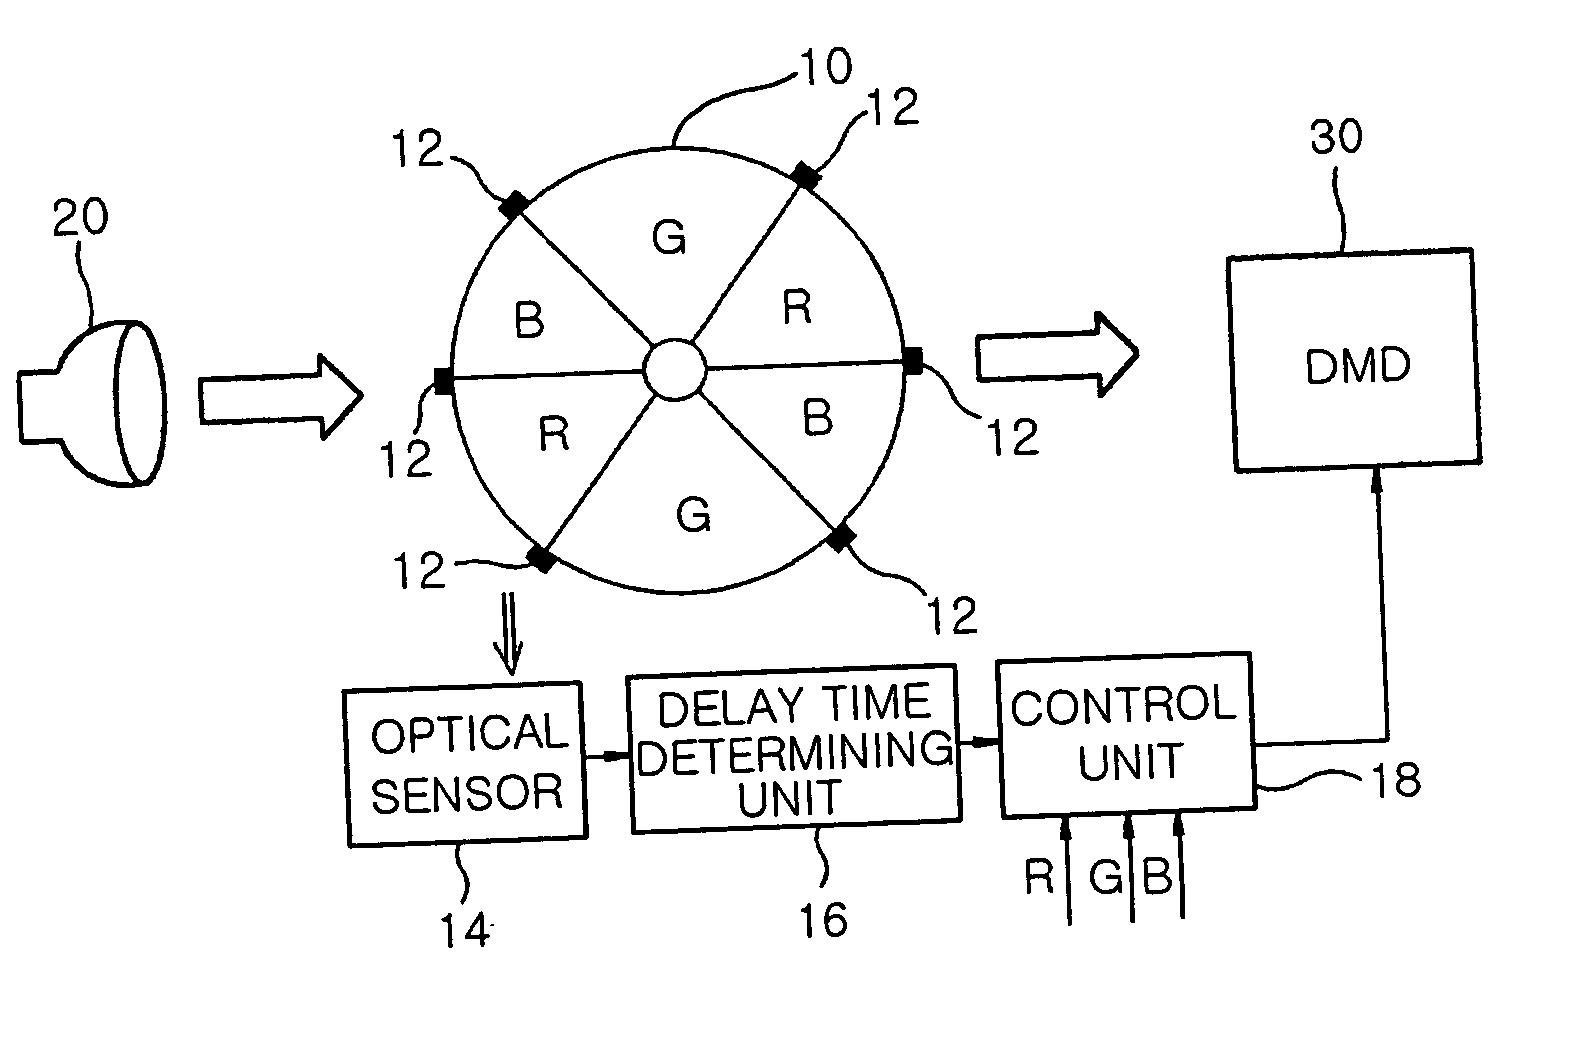 Apparatus and method for driving image display device using DMD